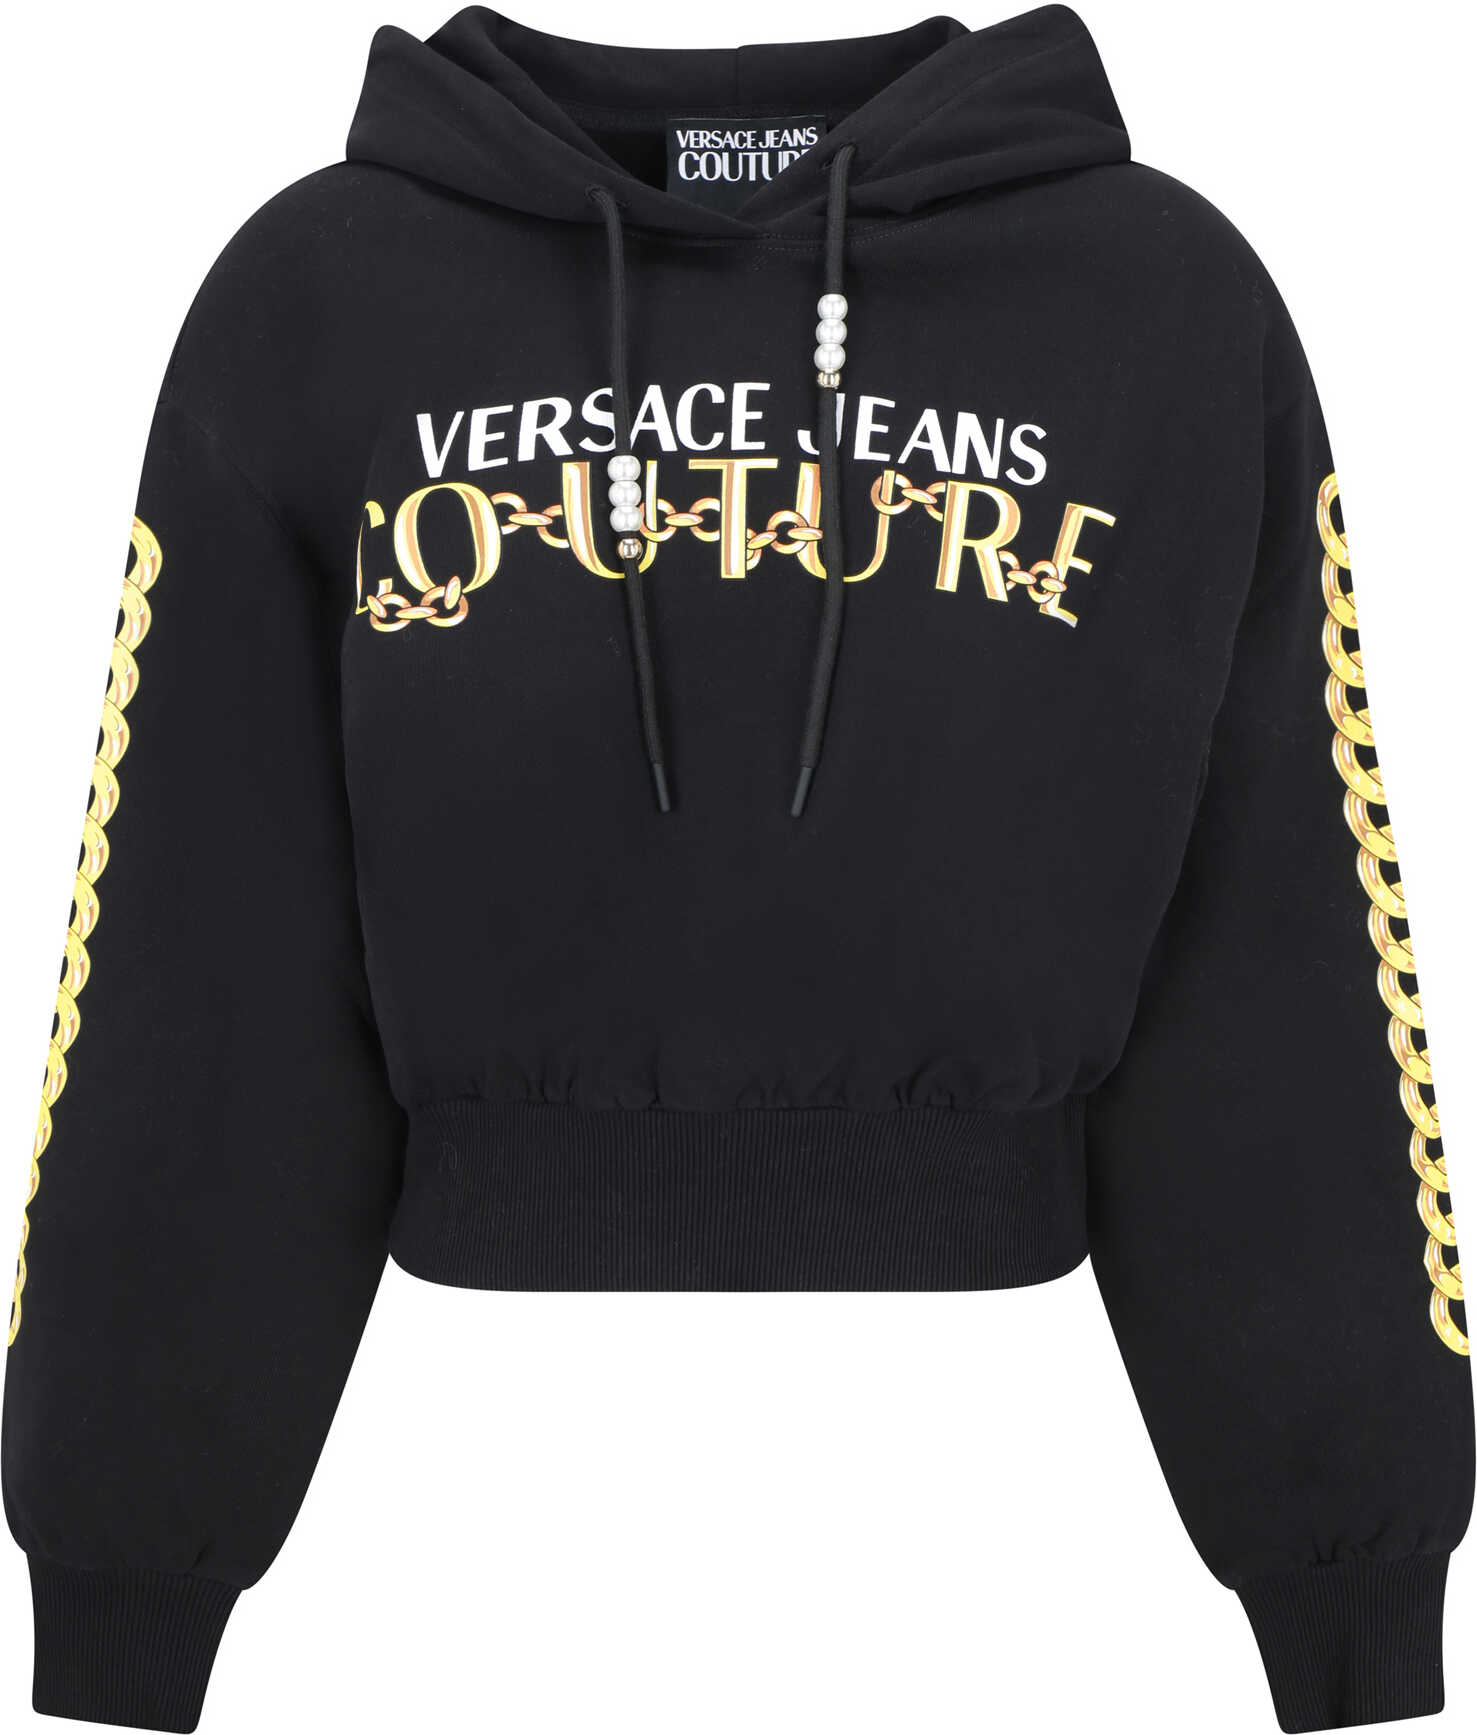 Versace Jeans Couture Logo Chain Hoodie BLACK/GOLD